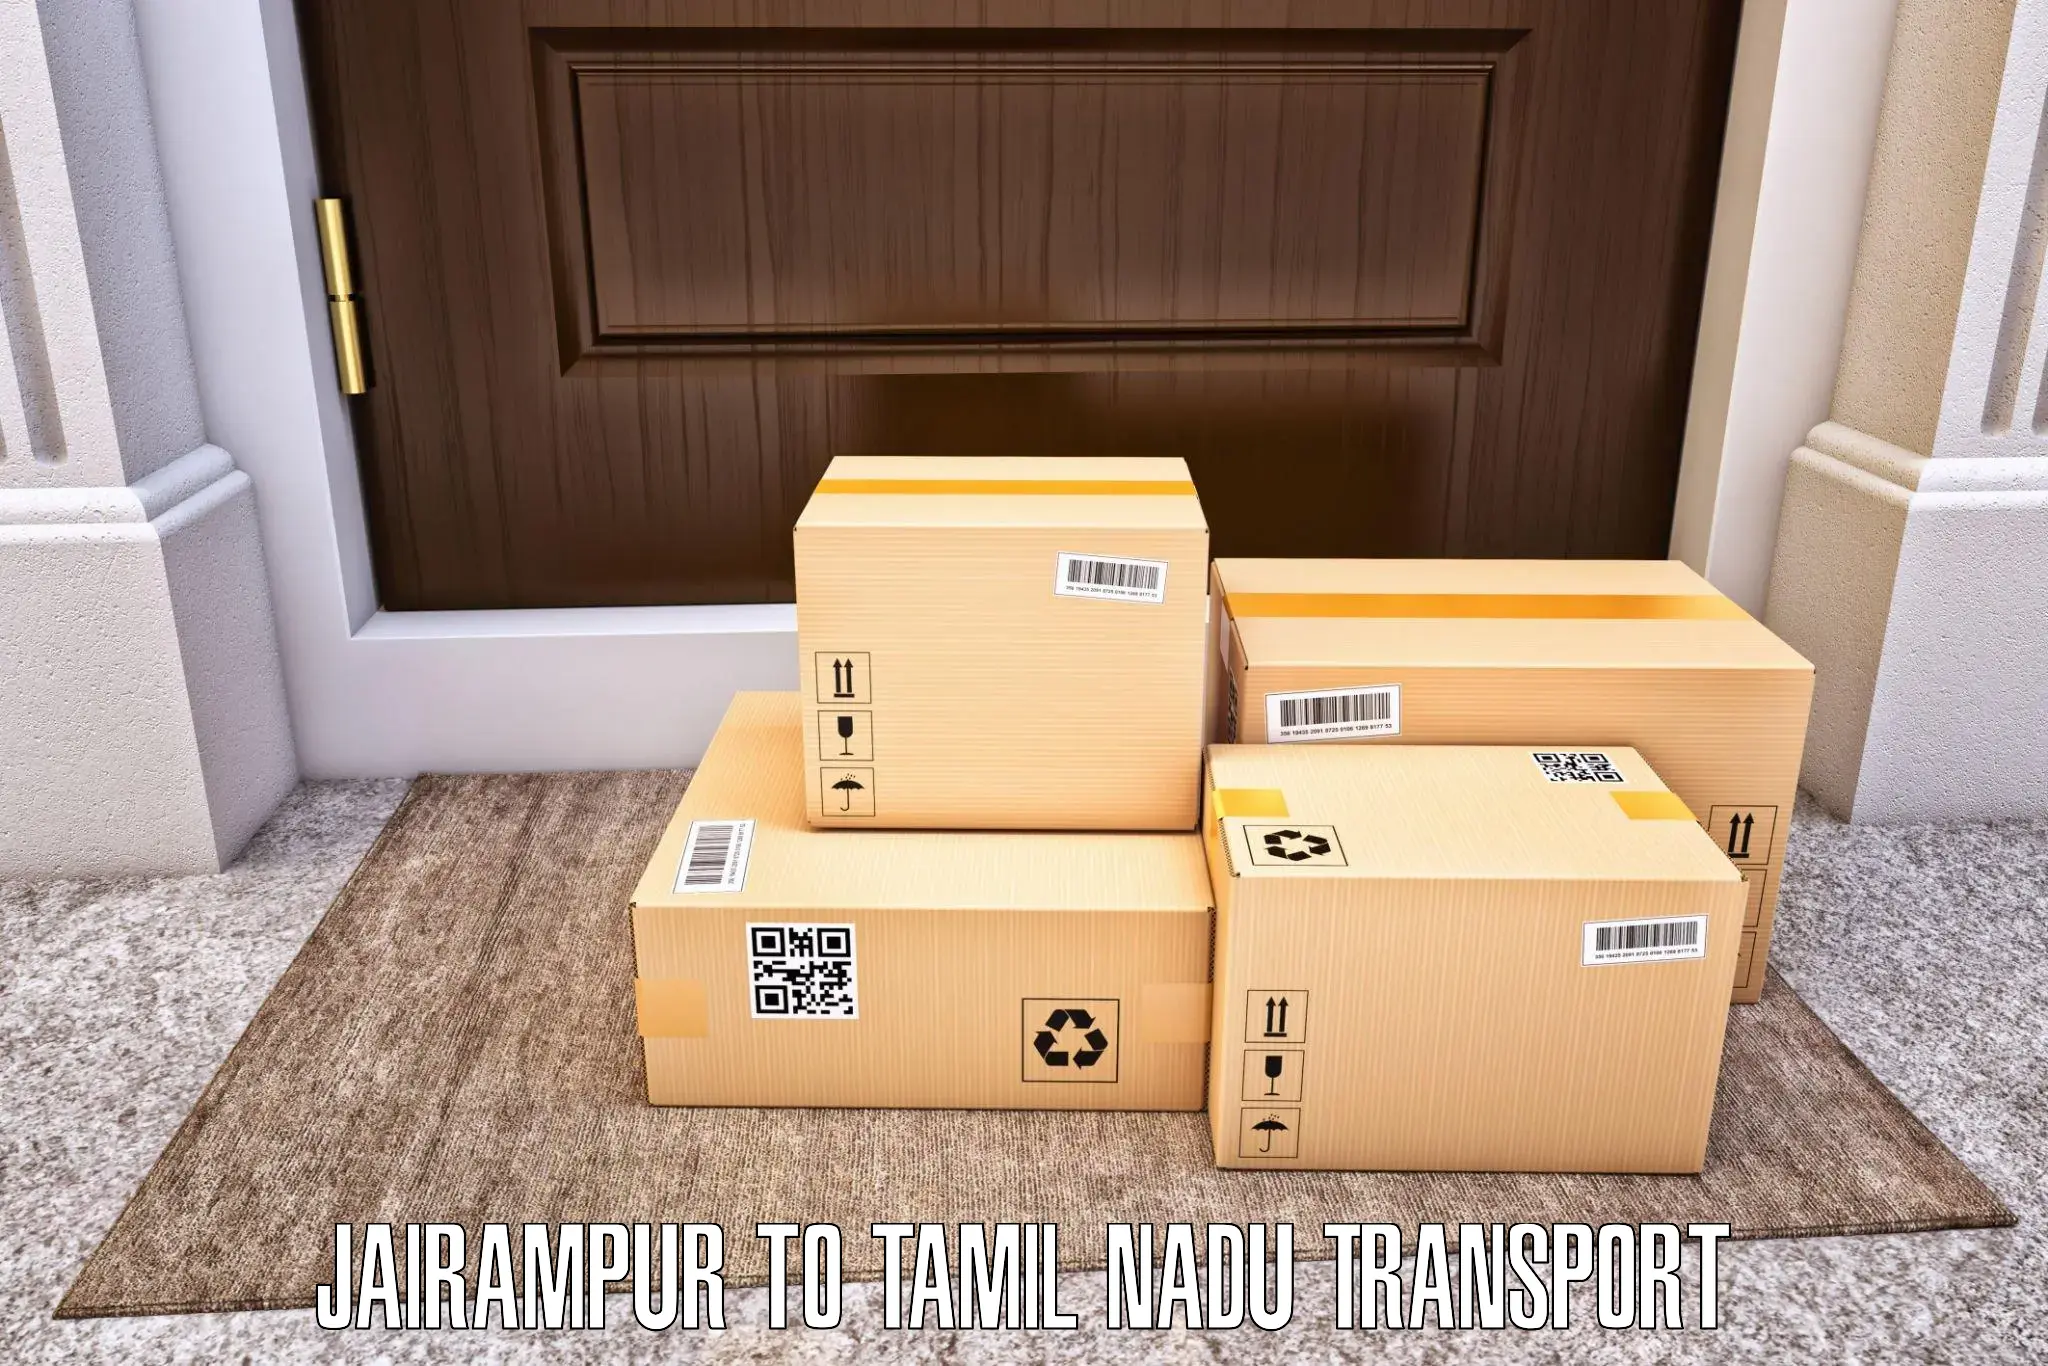 Road transport online services Jairampur to Shanmugha Arts Science Technology and Research Academy Thanjavur